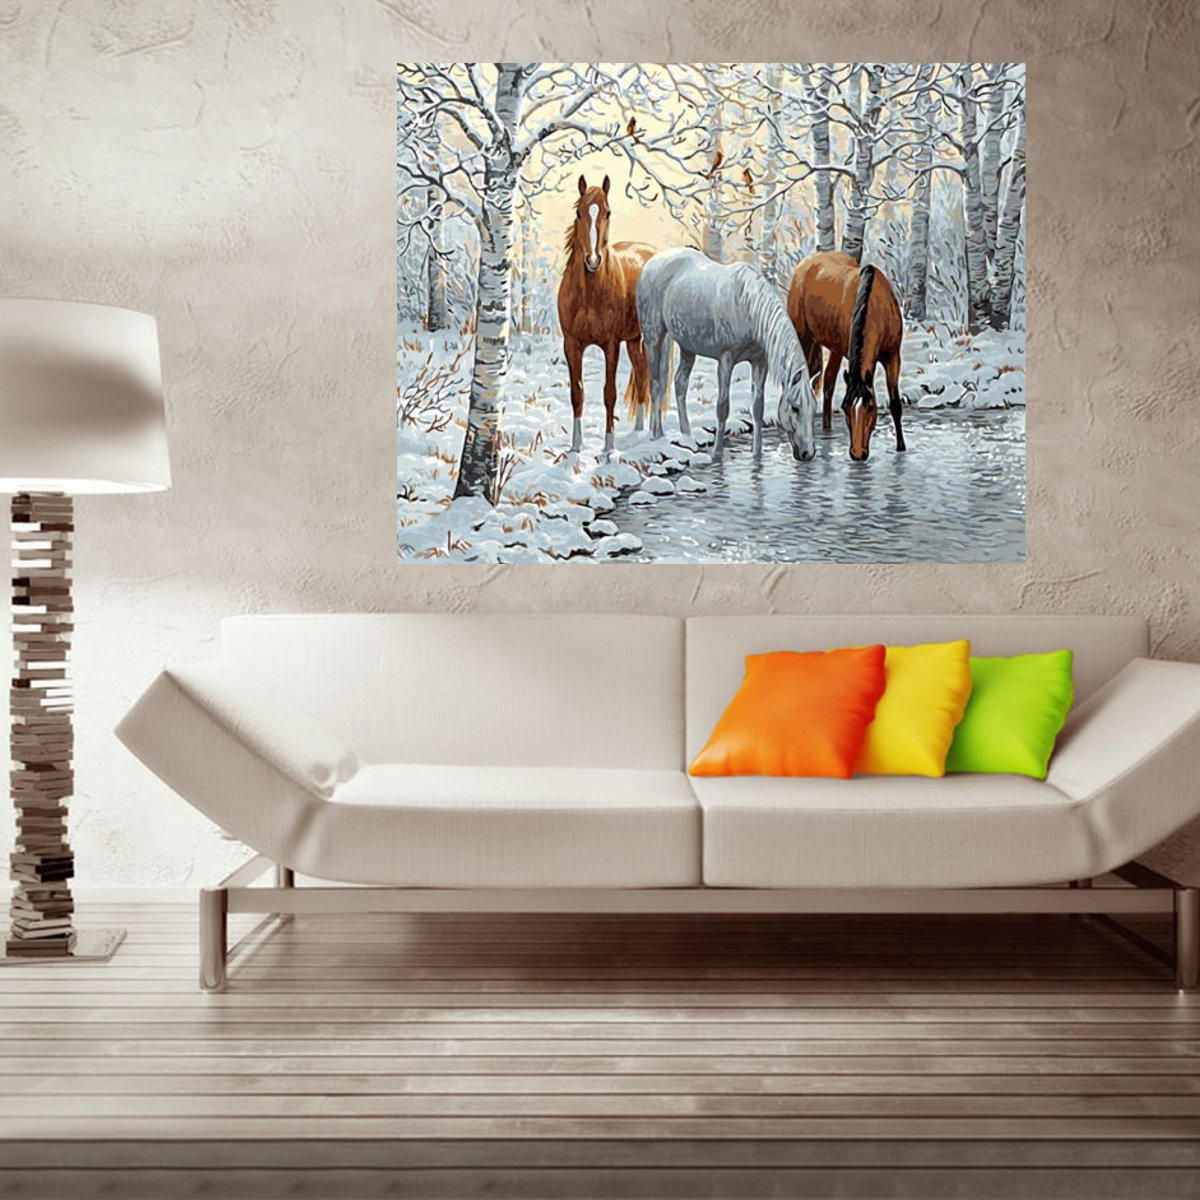 

Wood Framed DIY Paint By Number 16"*20" kit Three Horses In Ice Forest